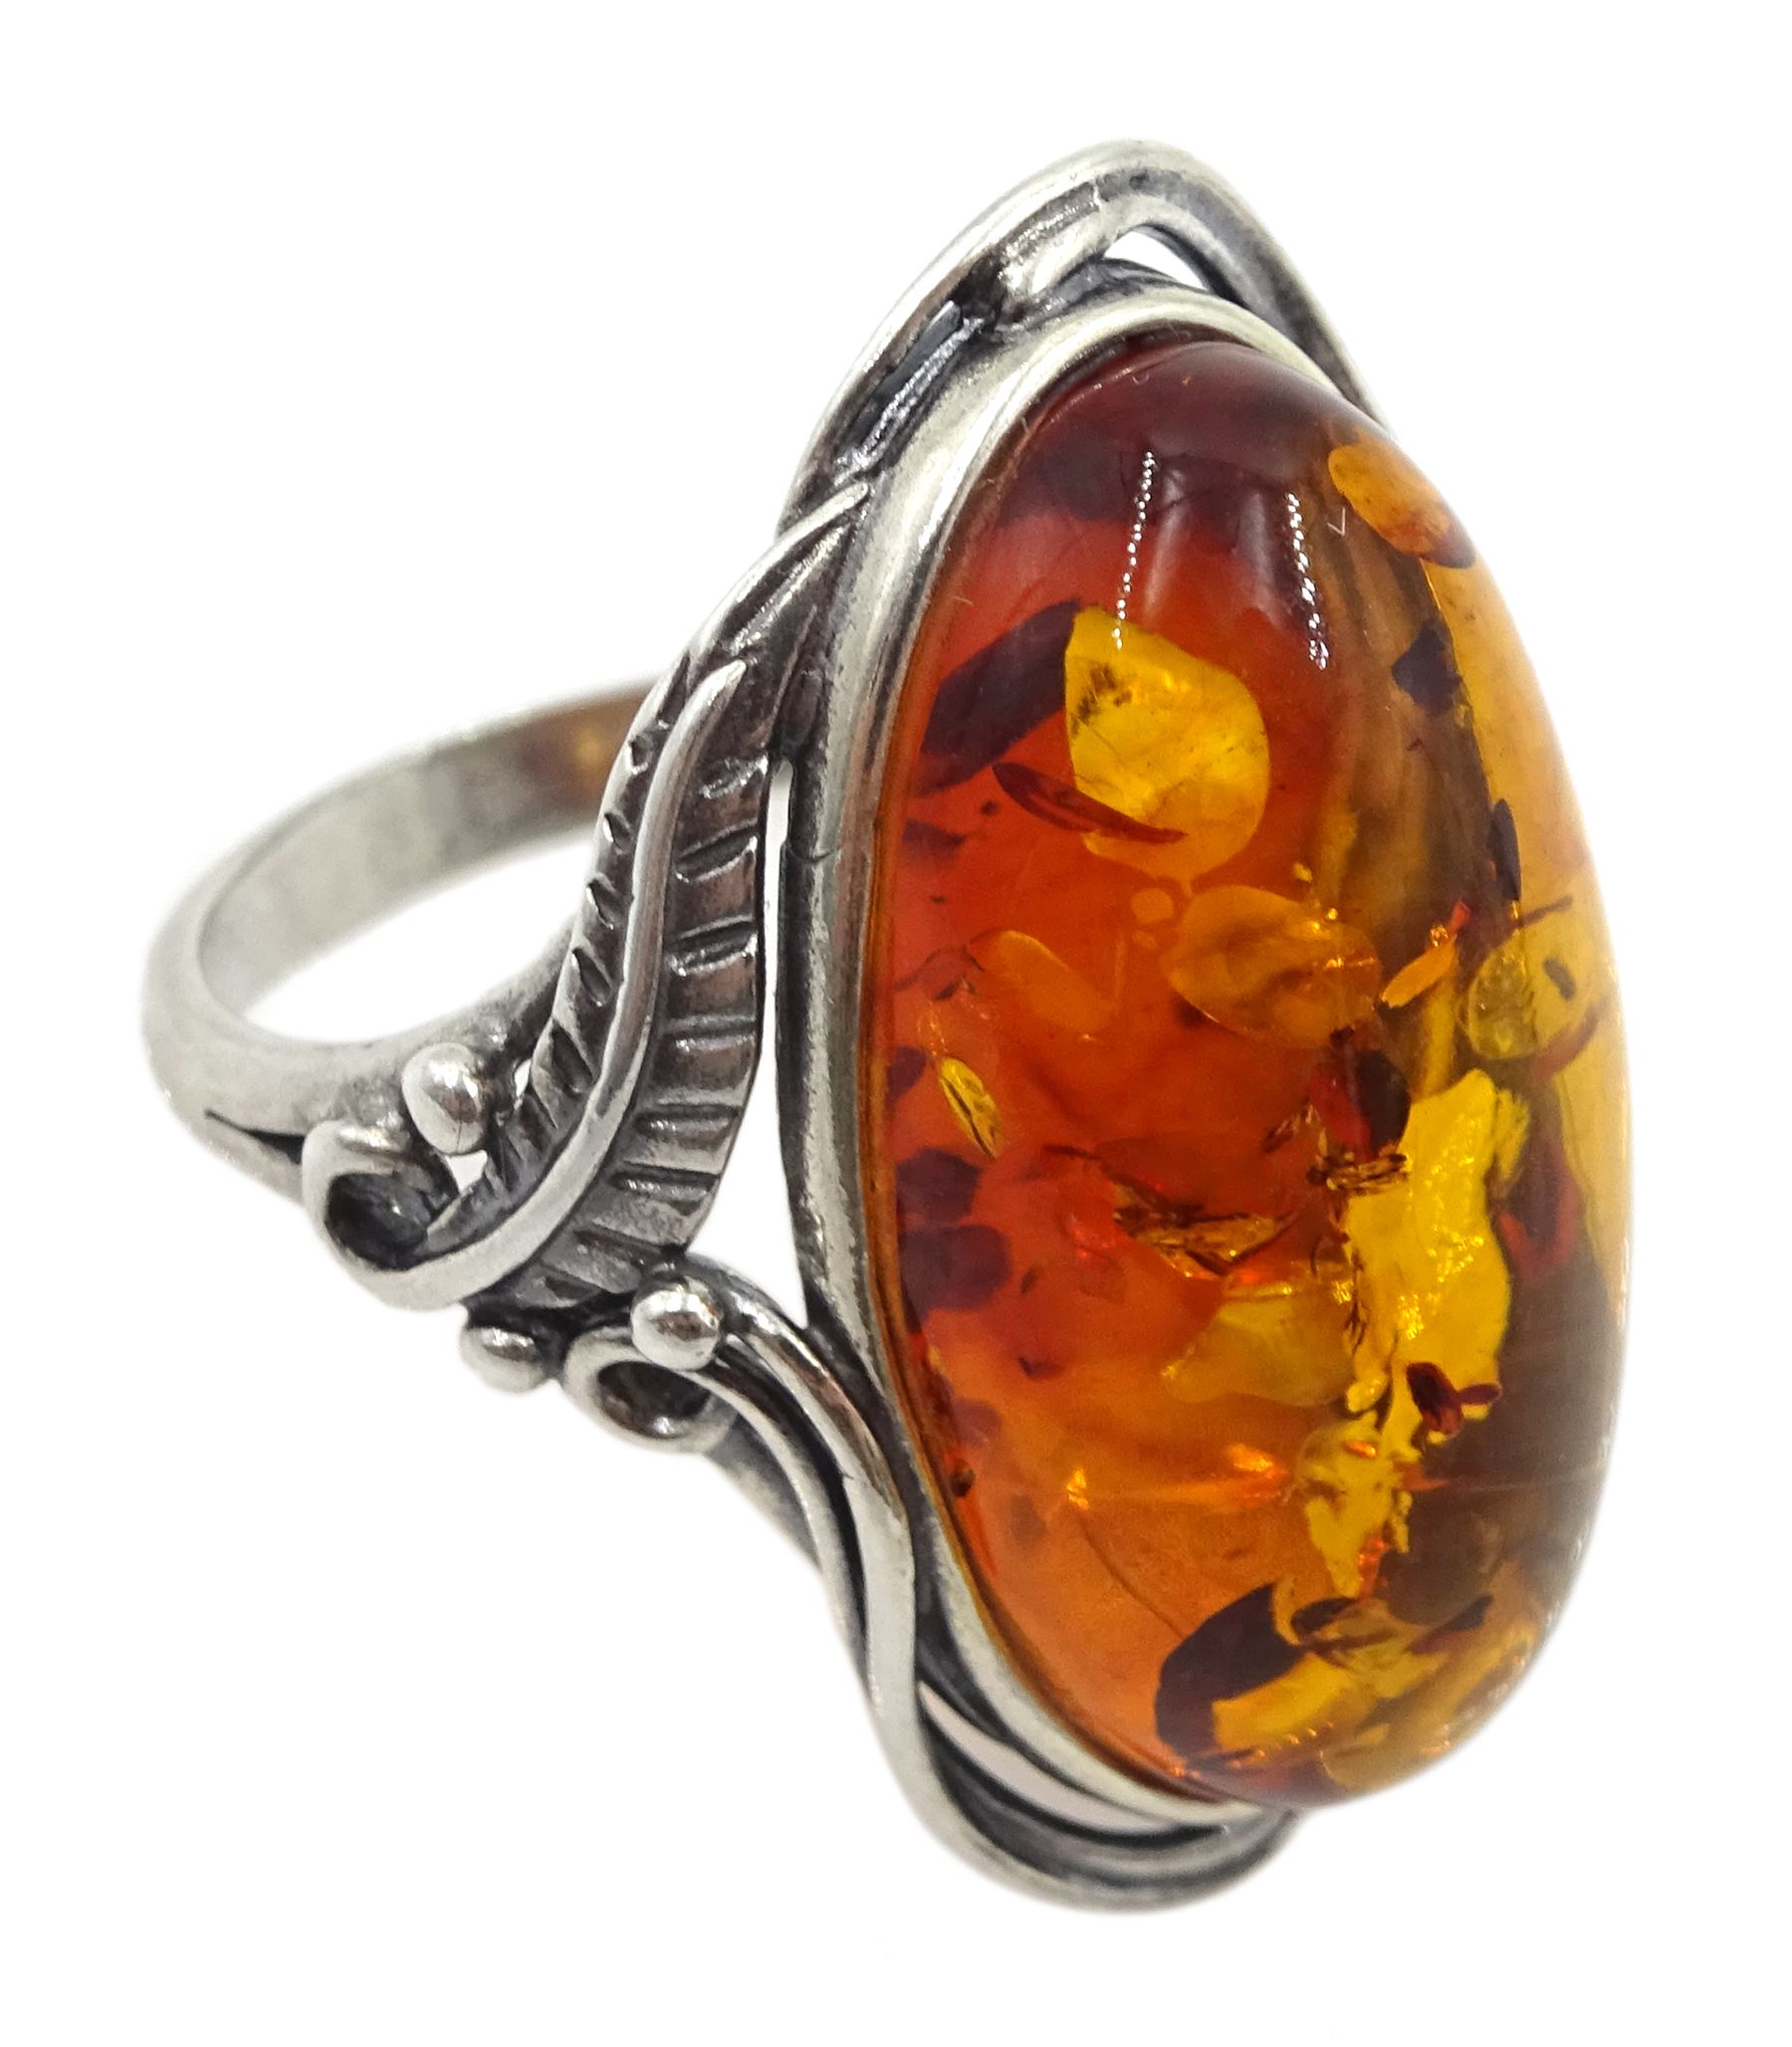 Silver Baltic amber ring - Image 3 of 4